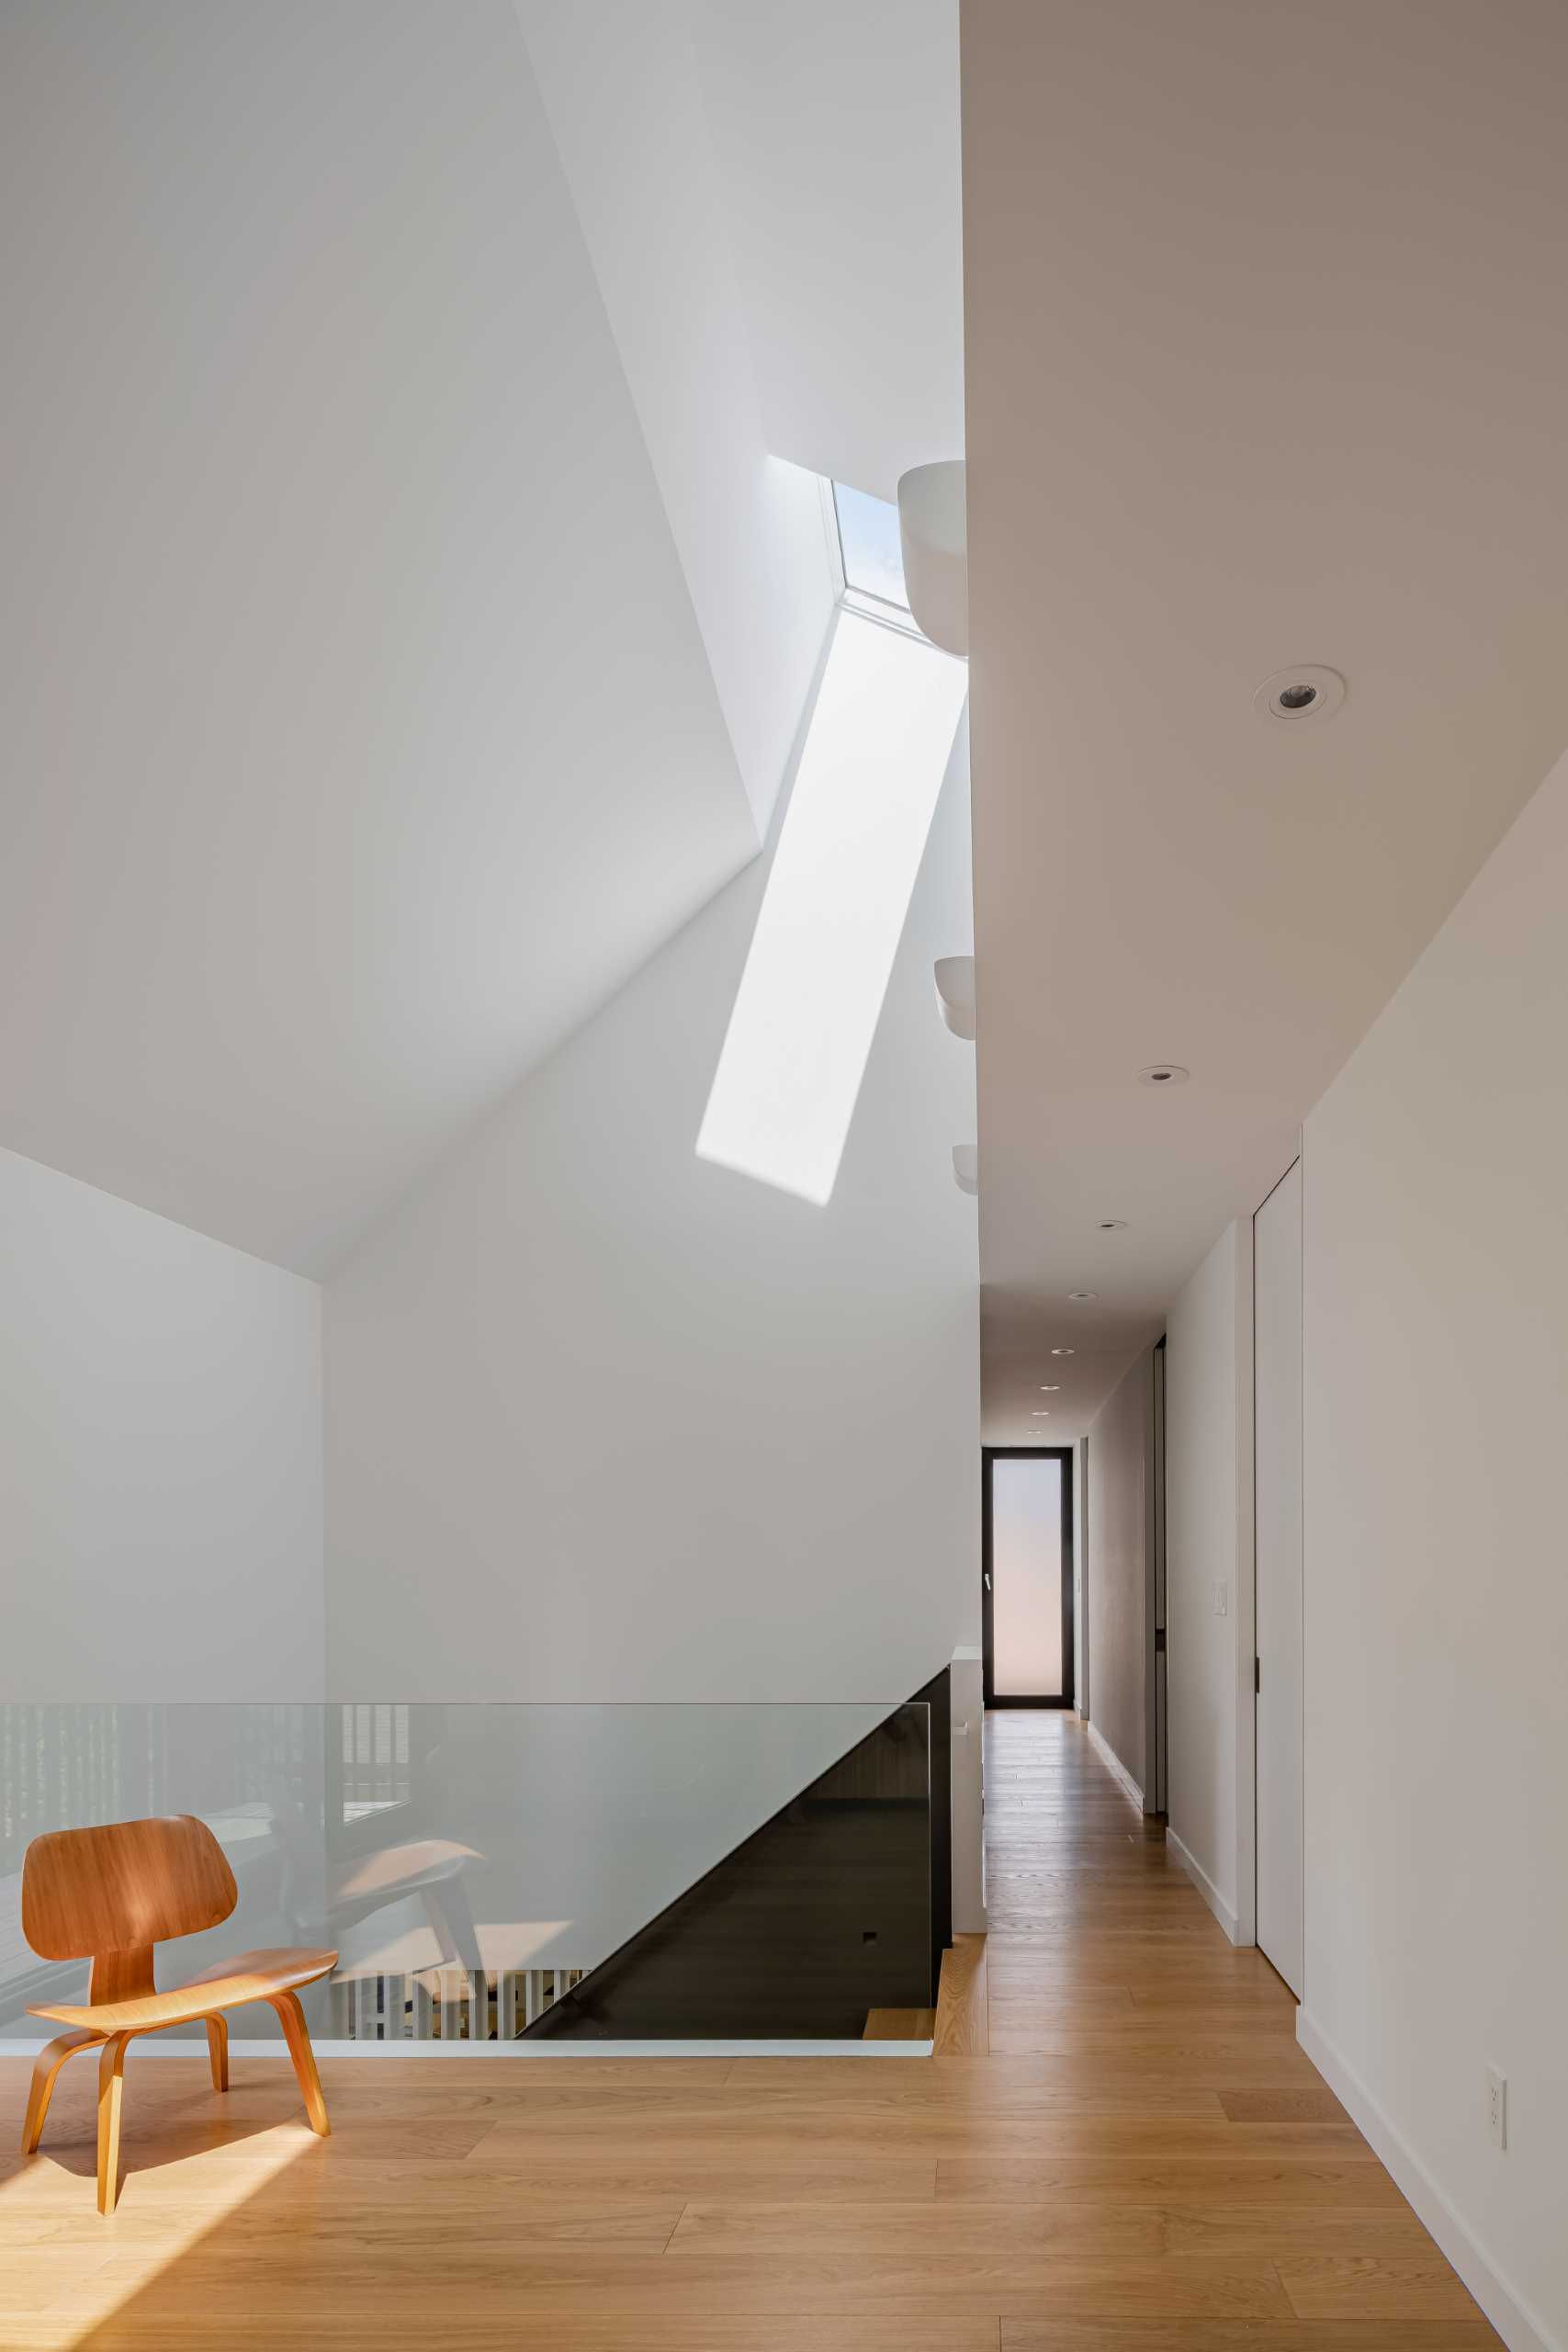 A modern home with a skylight at the top of the stairs.